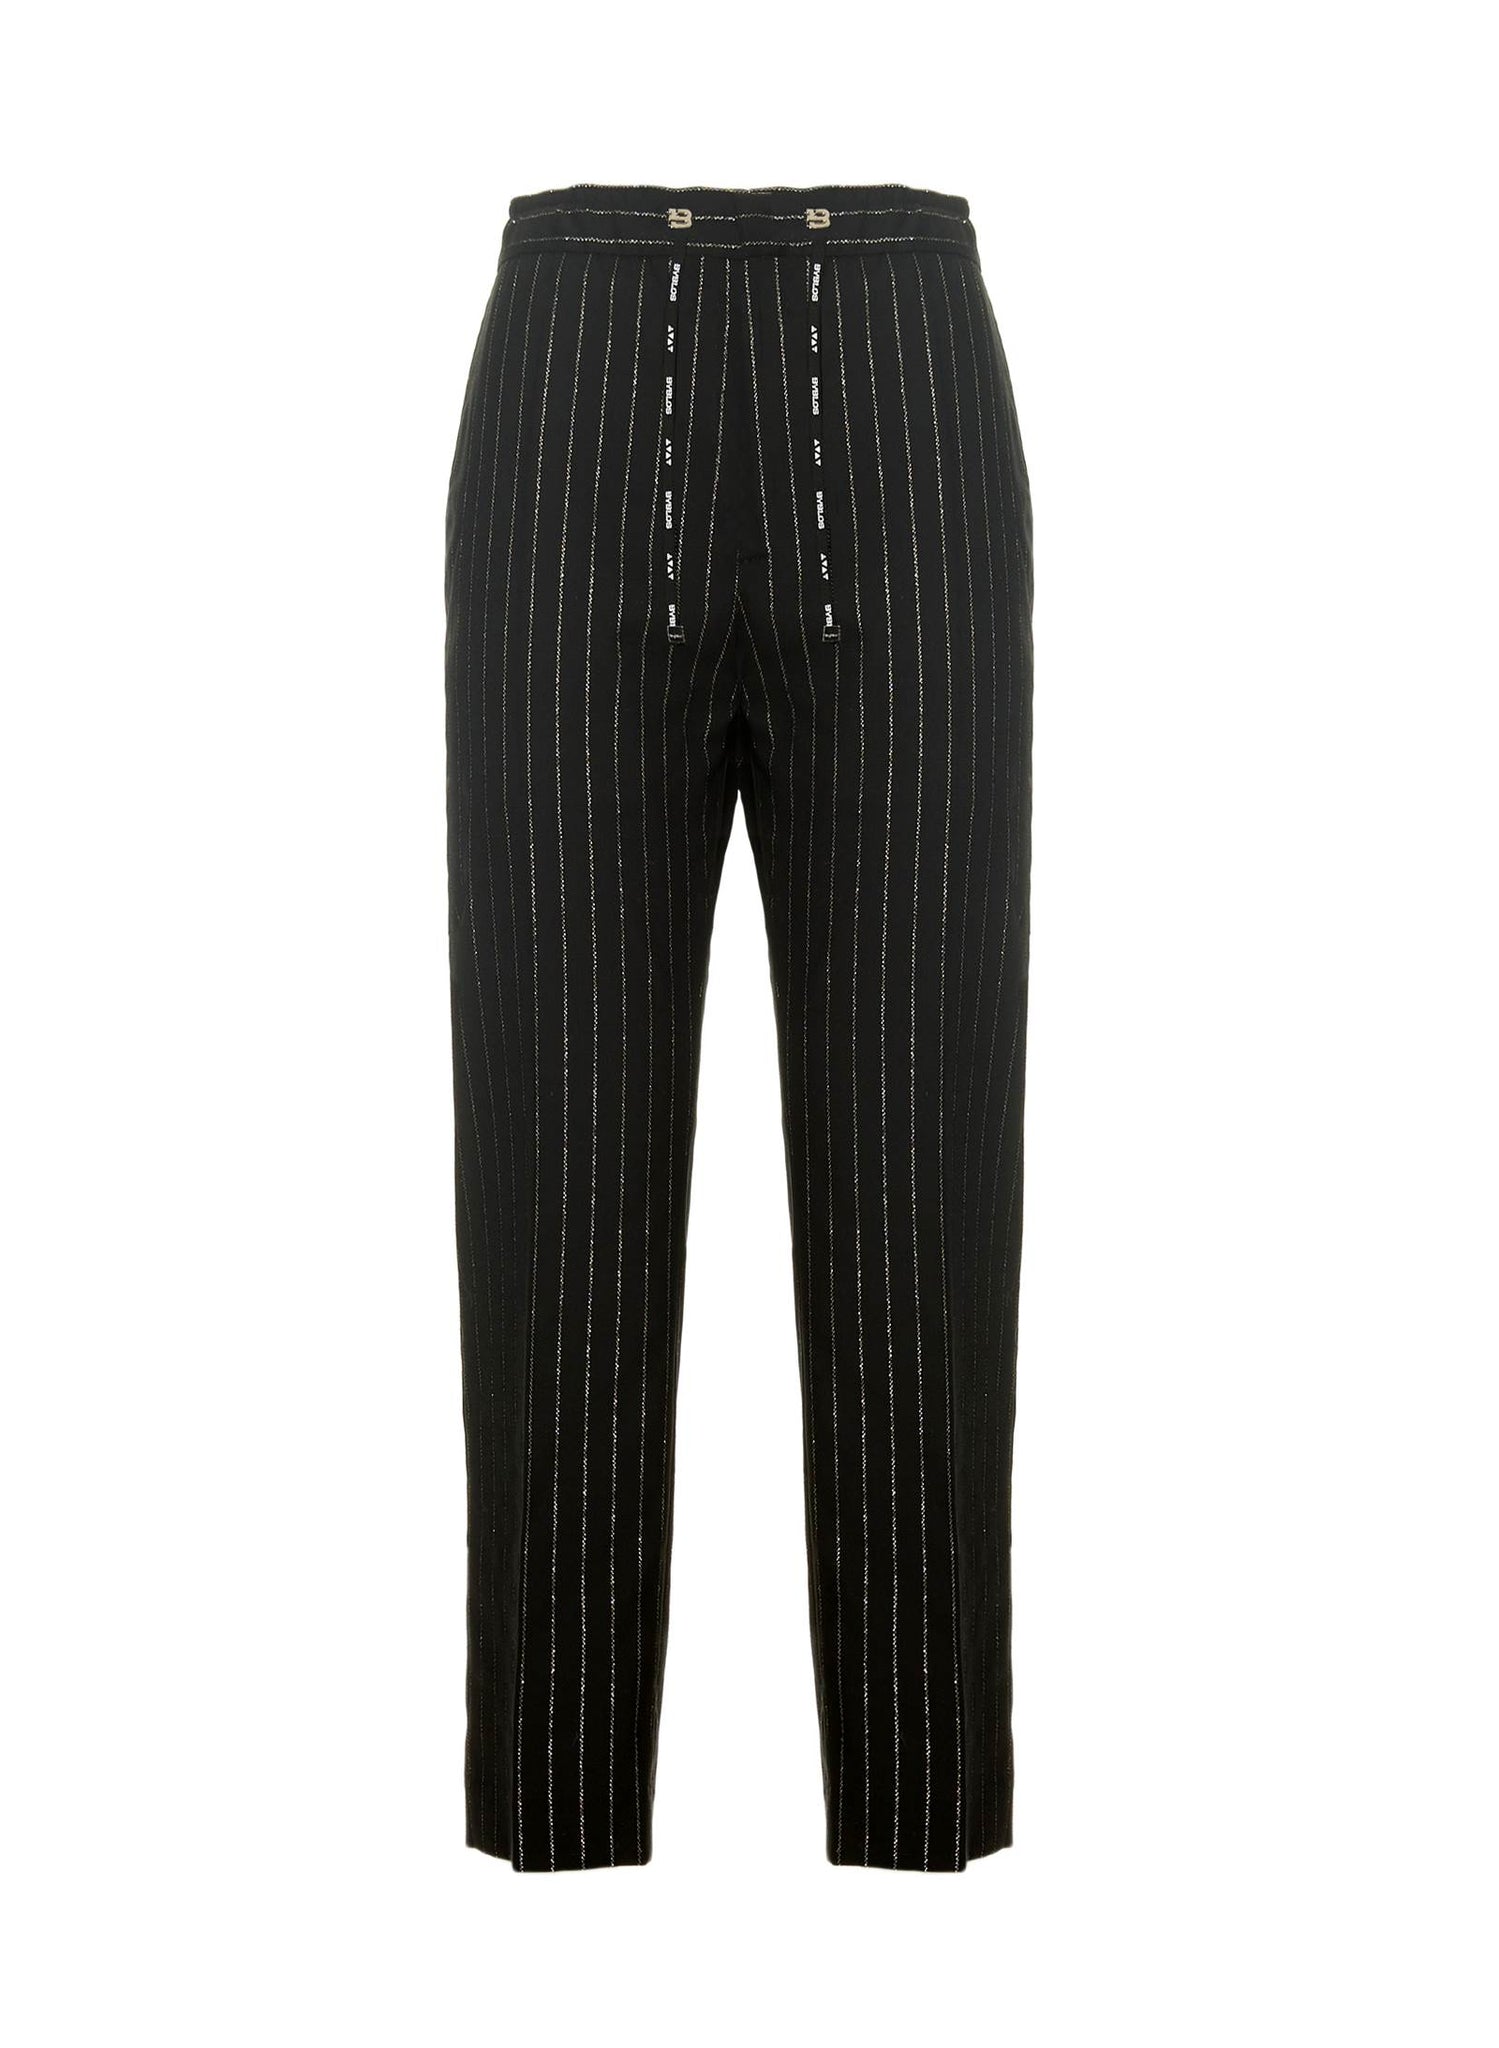 Trousers "Pin-Striped"